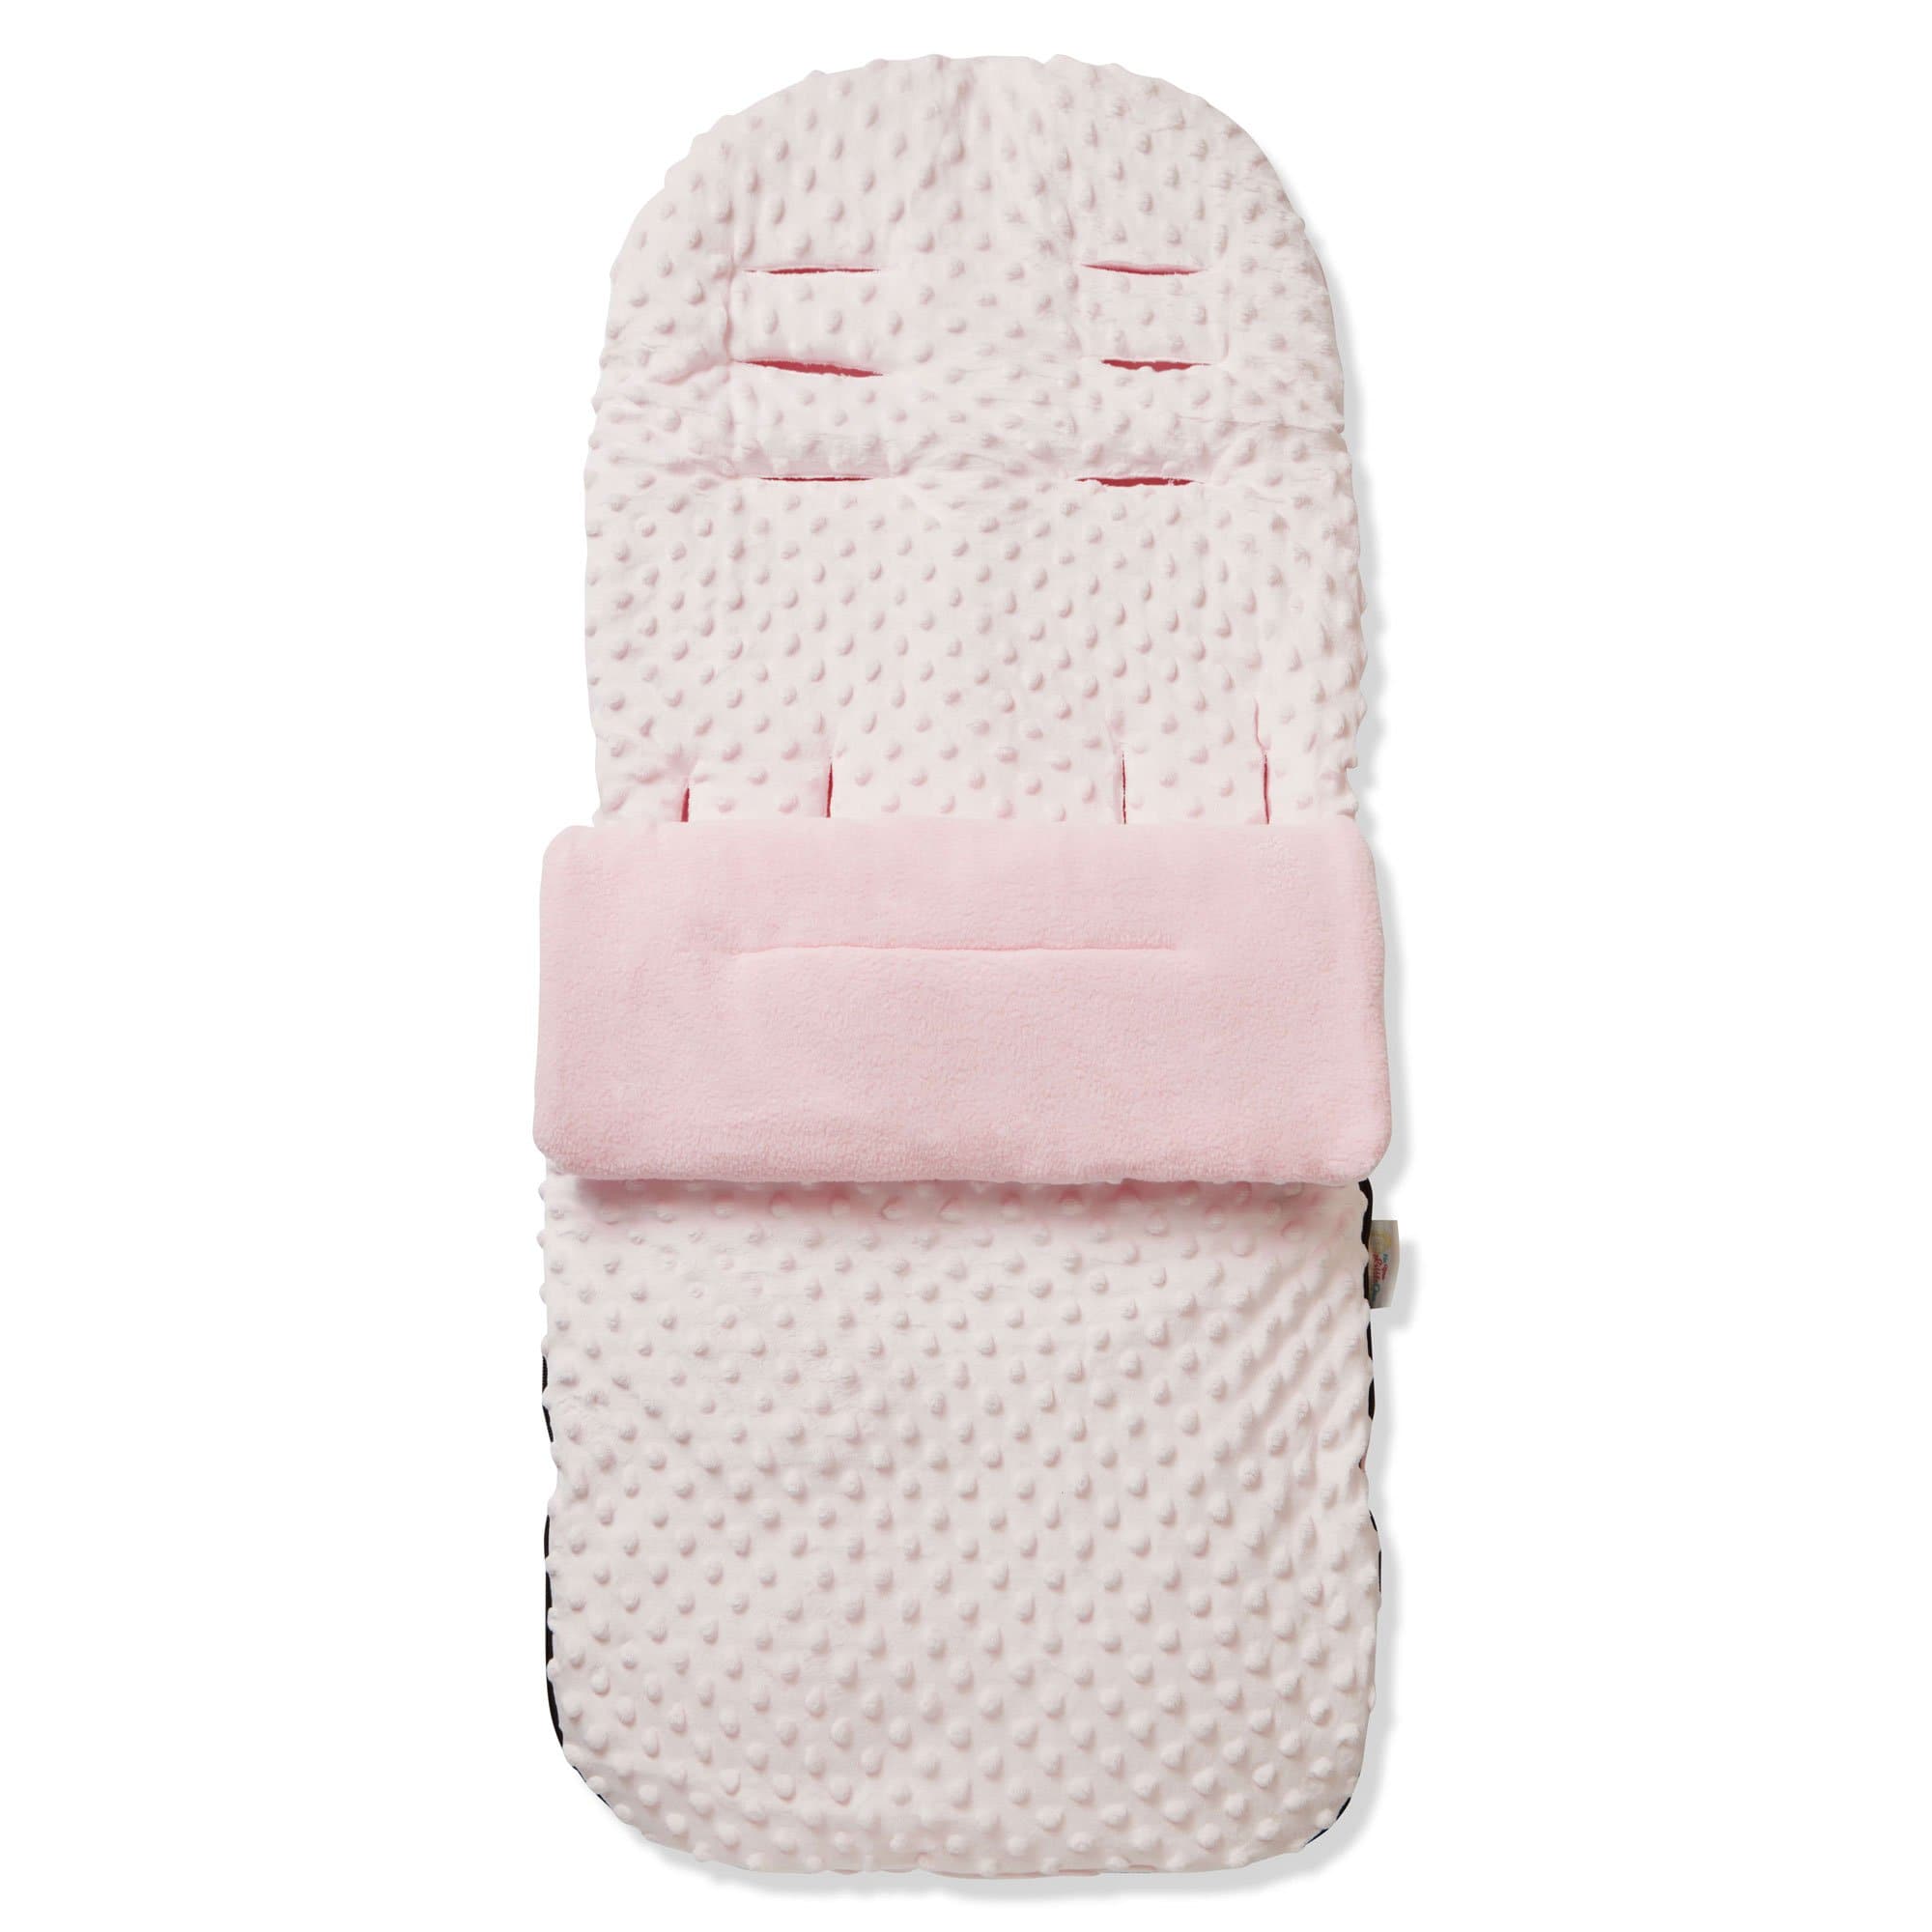 Dimple Footmuff / Cosy Toes Compatible with BabyStyle - Pink / Fits All Models | For Your Little One